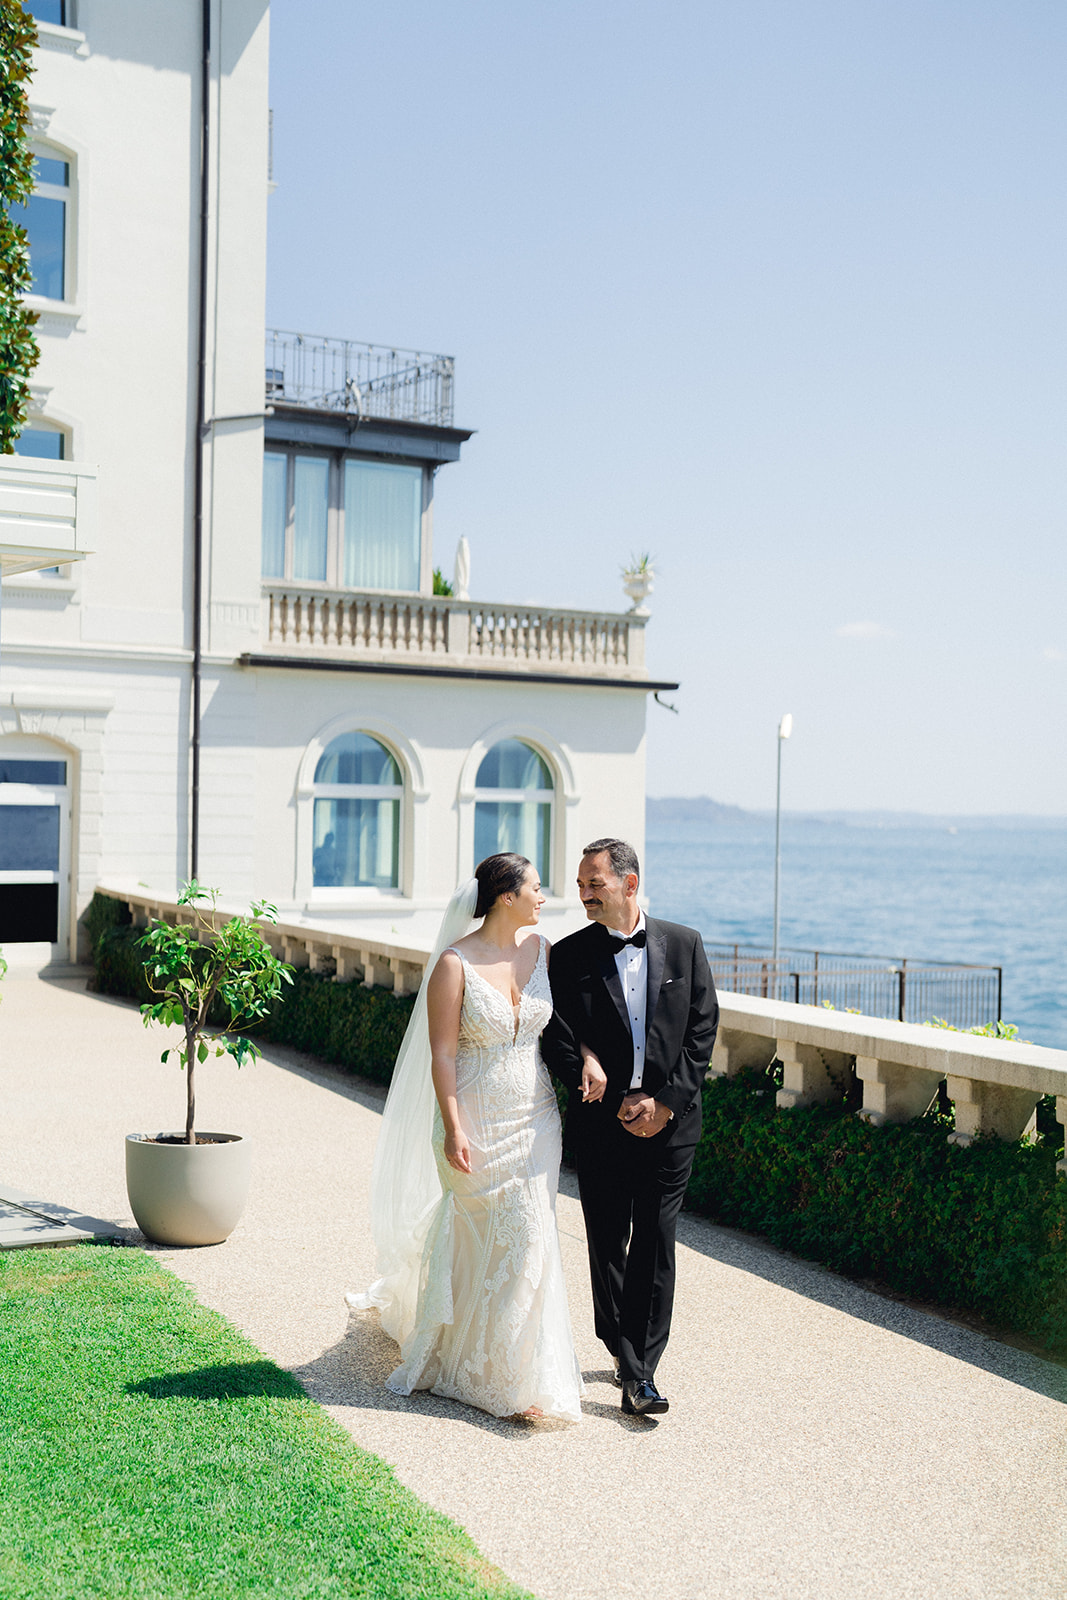 The bride and her father leave Hotel Bellariva to reach the wedding ceremony at Isola del Garda